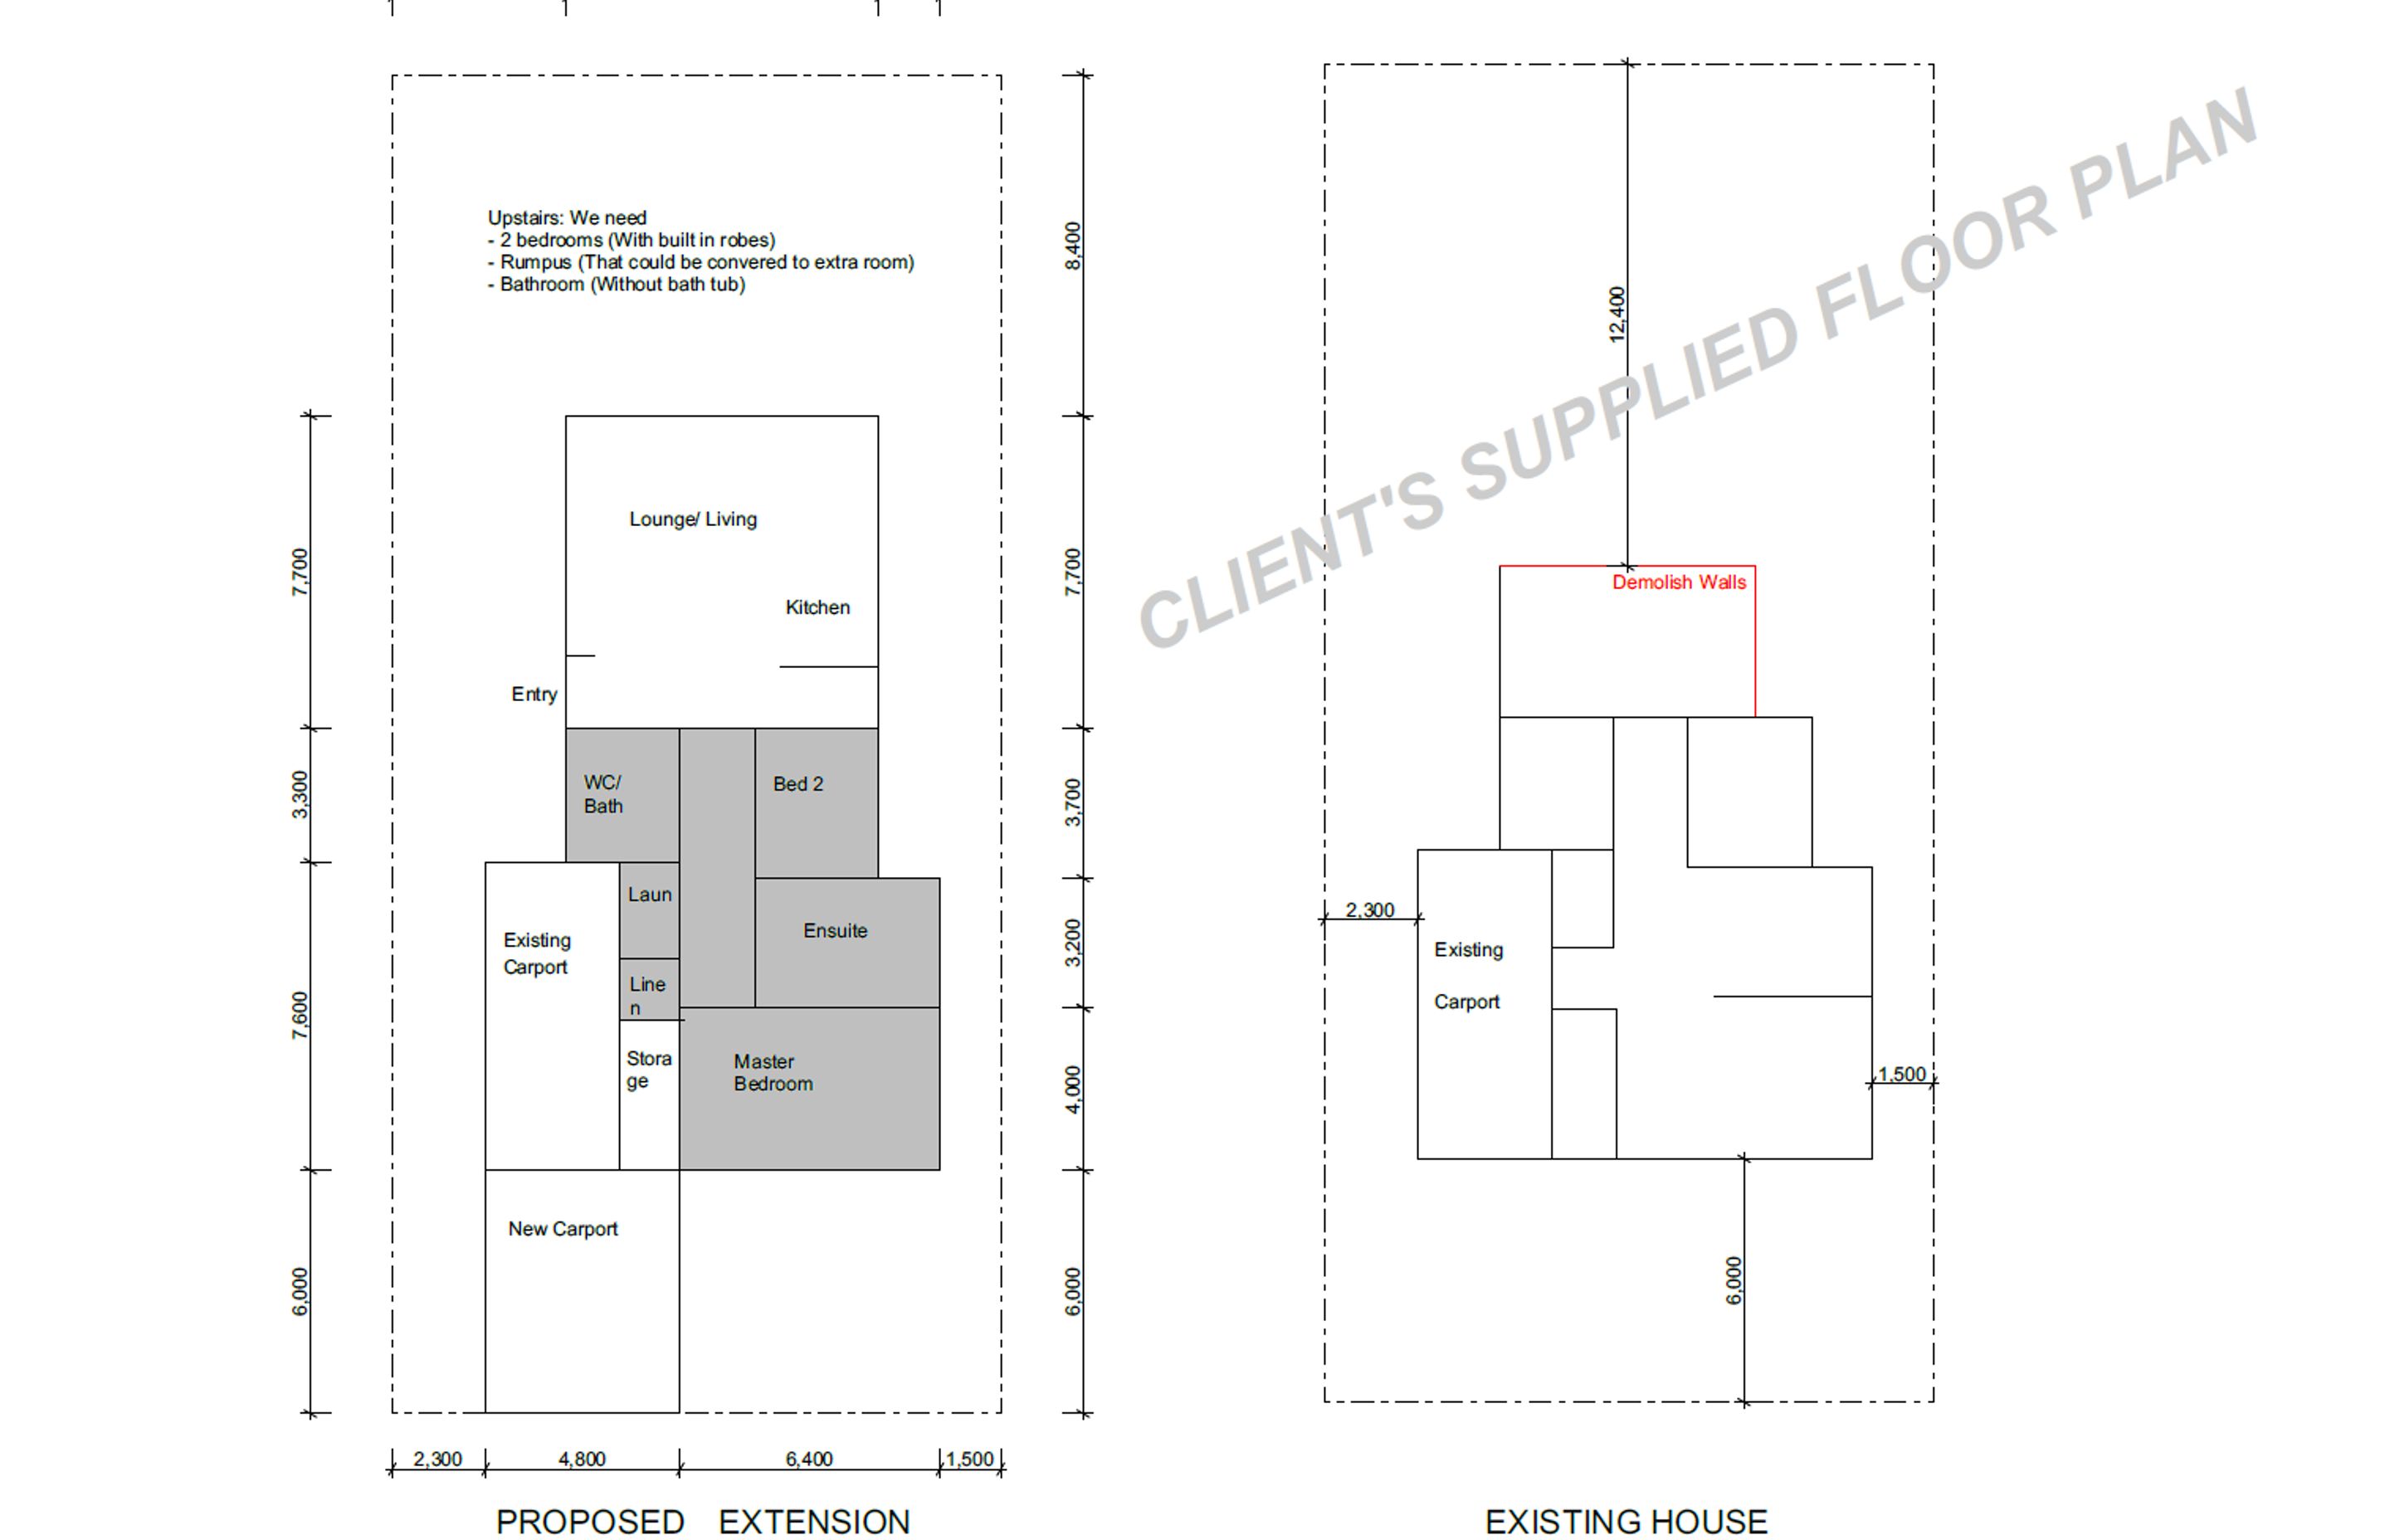 Client's floor plans used as base to develop the design further, as seen above.